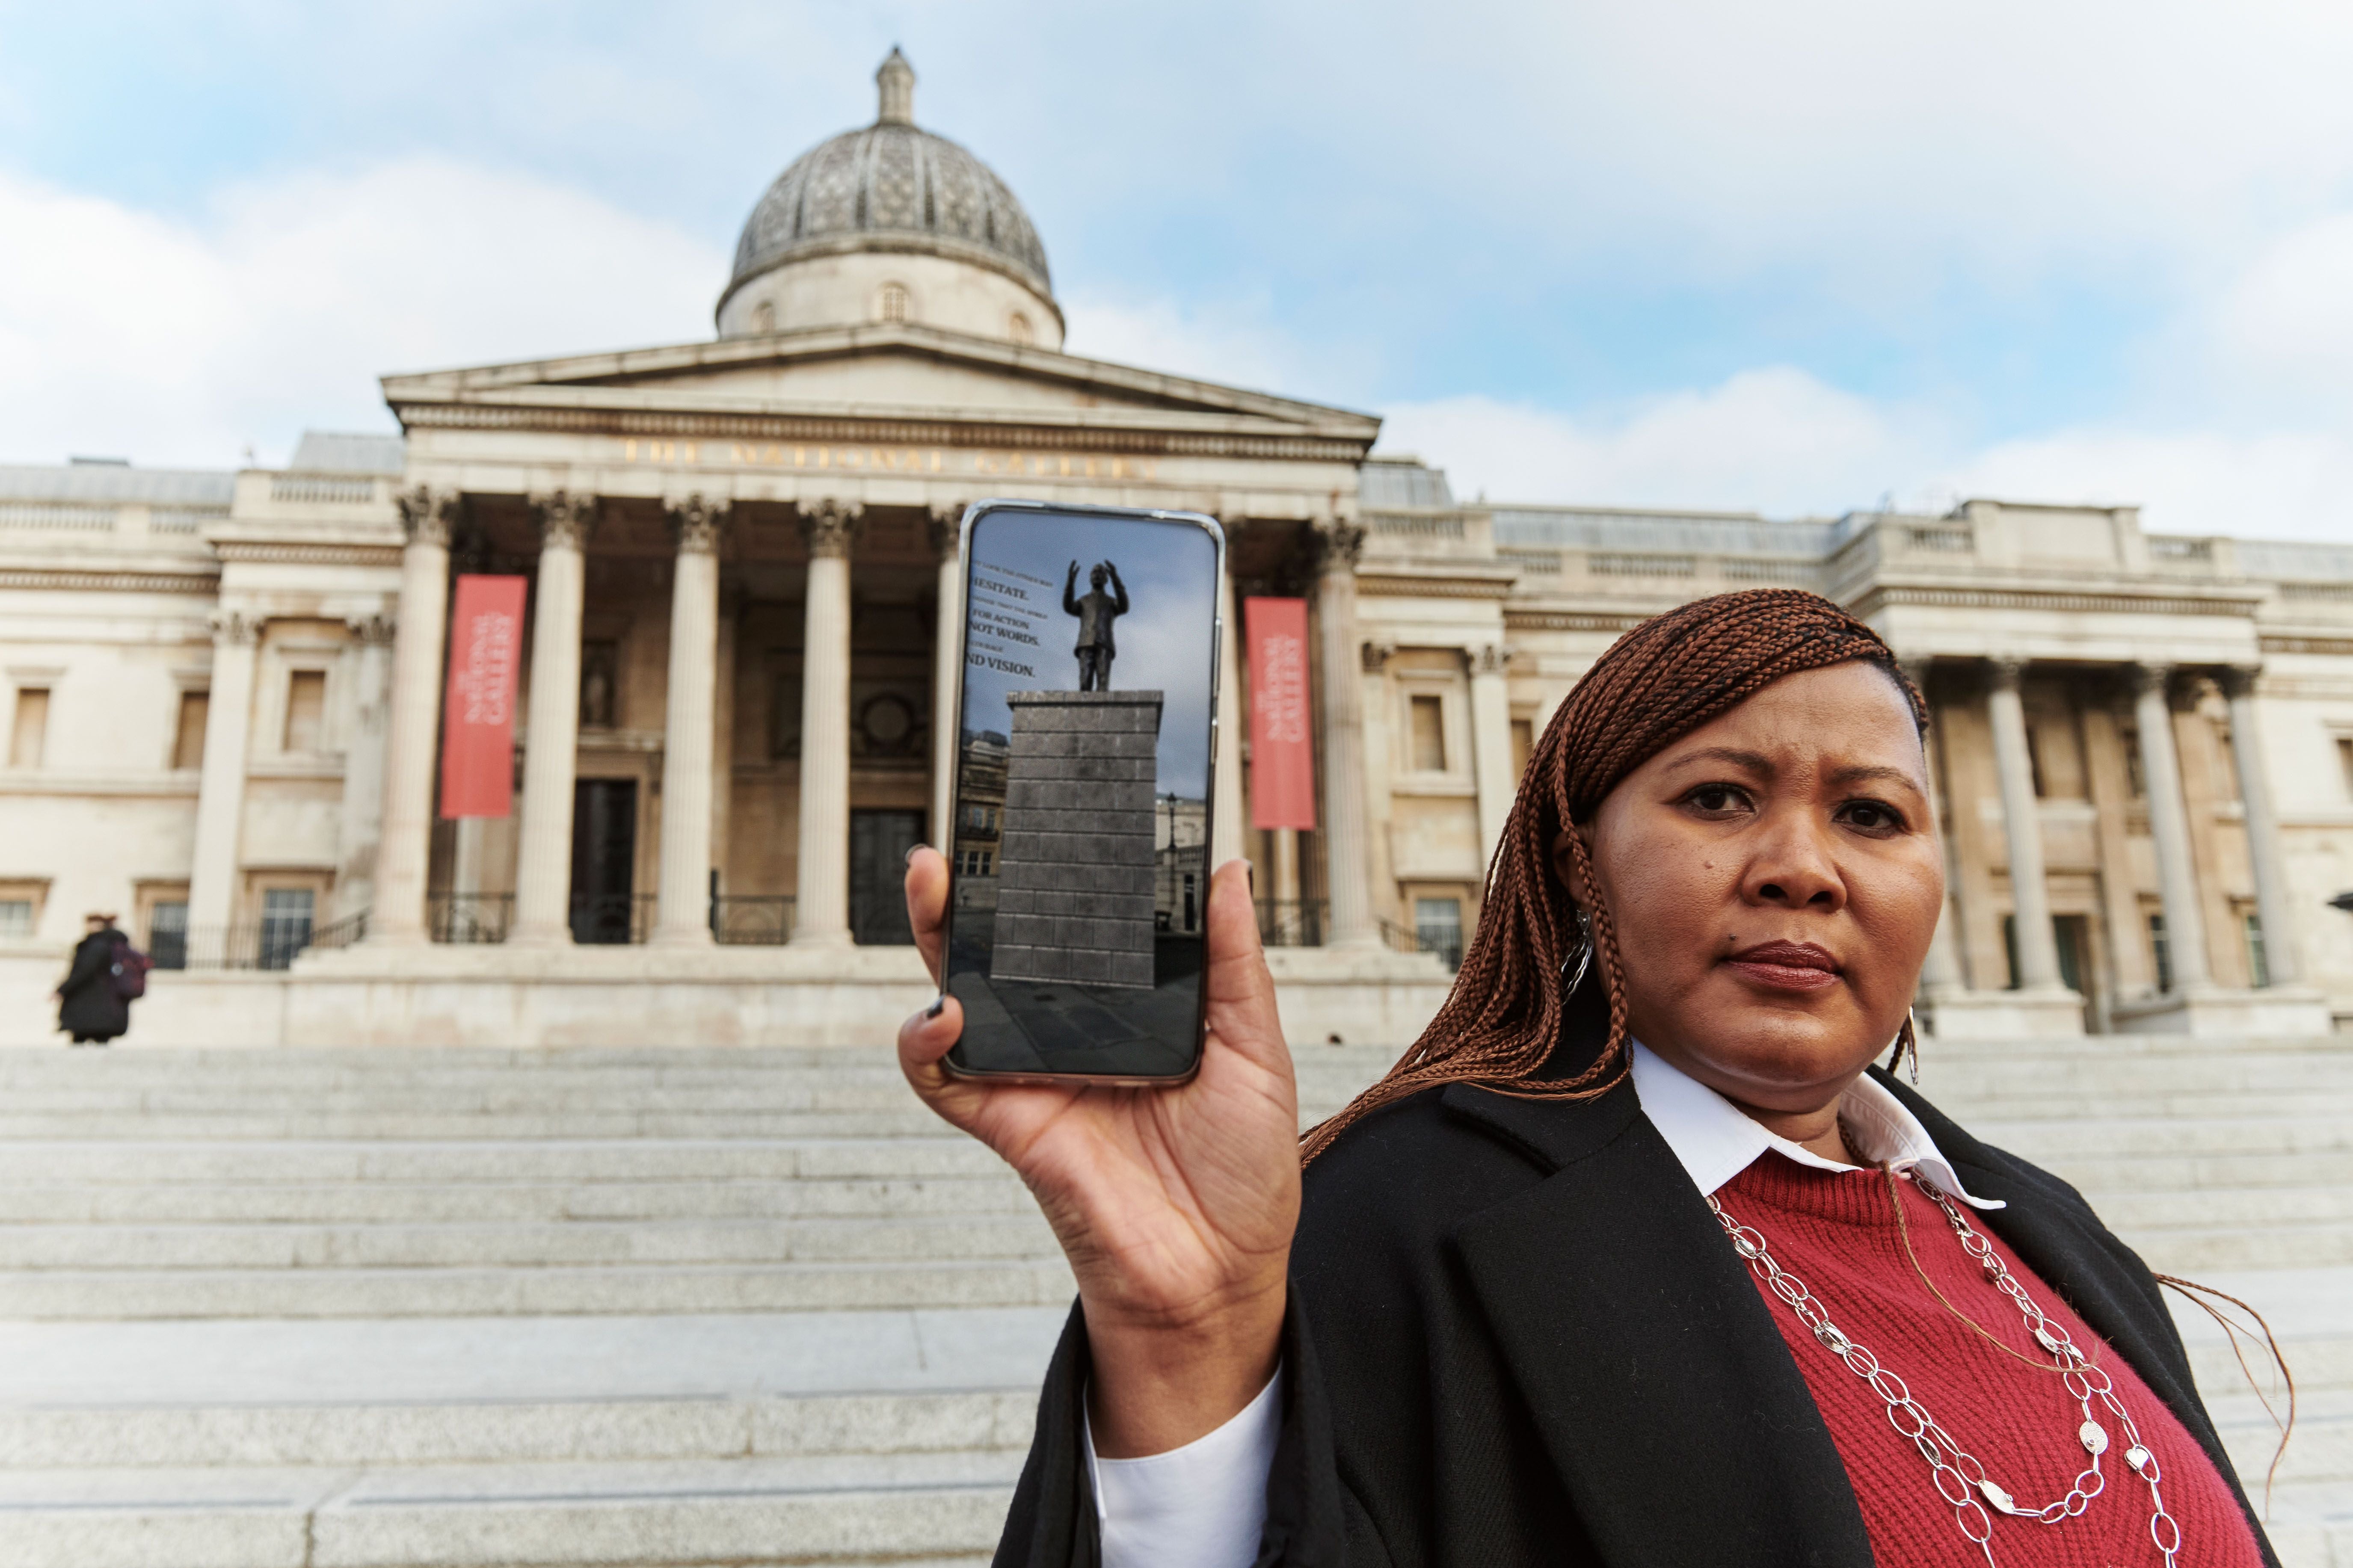 Tukwini Mandela displays a photo of her grandfather’s statue as part of Snapchat’s Hidden Black Stories augmented reality project